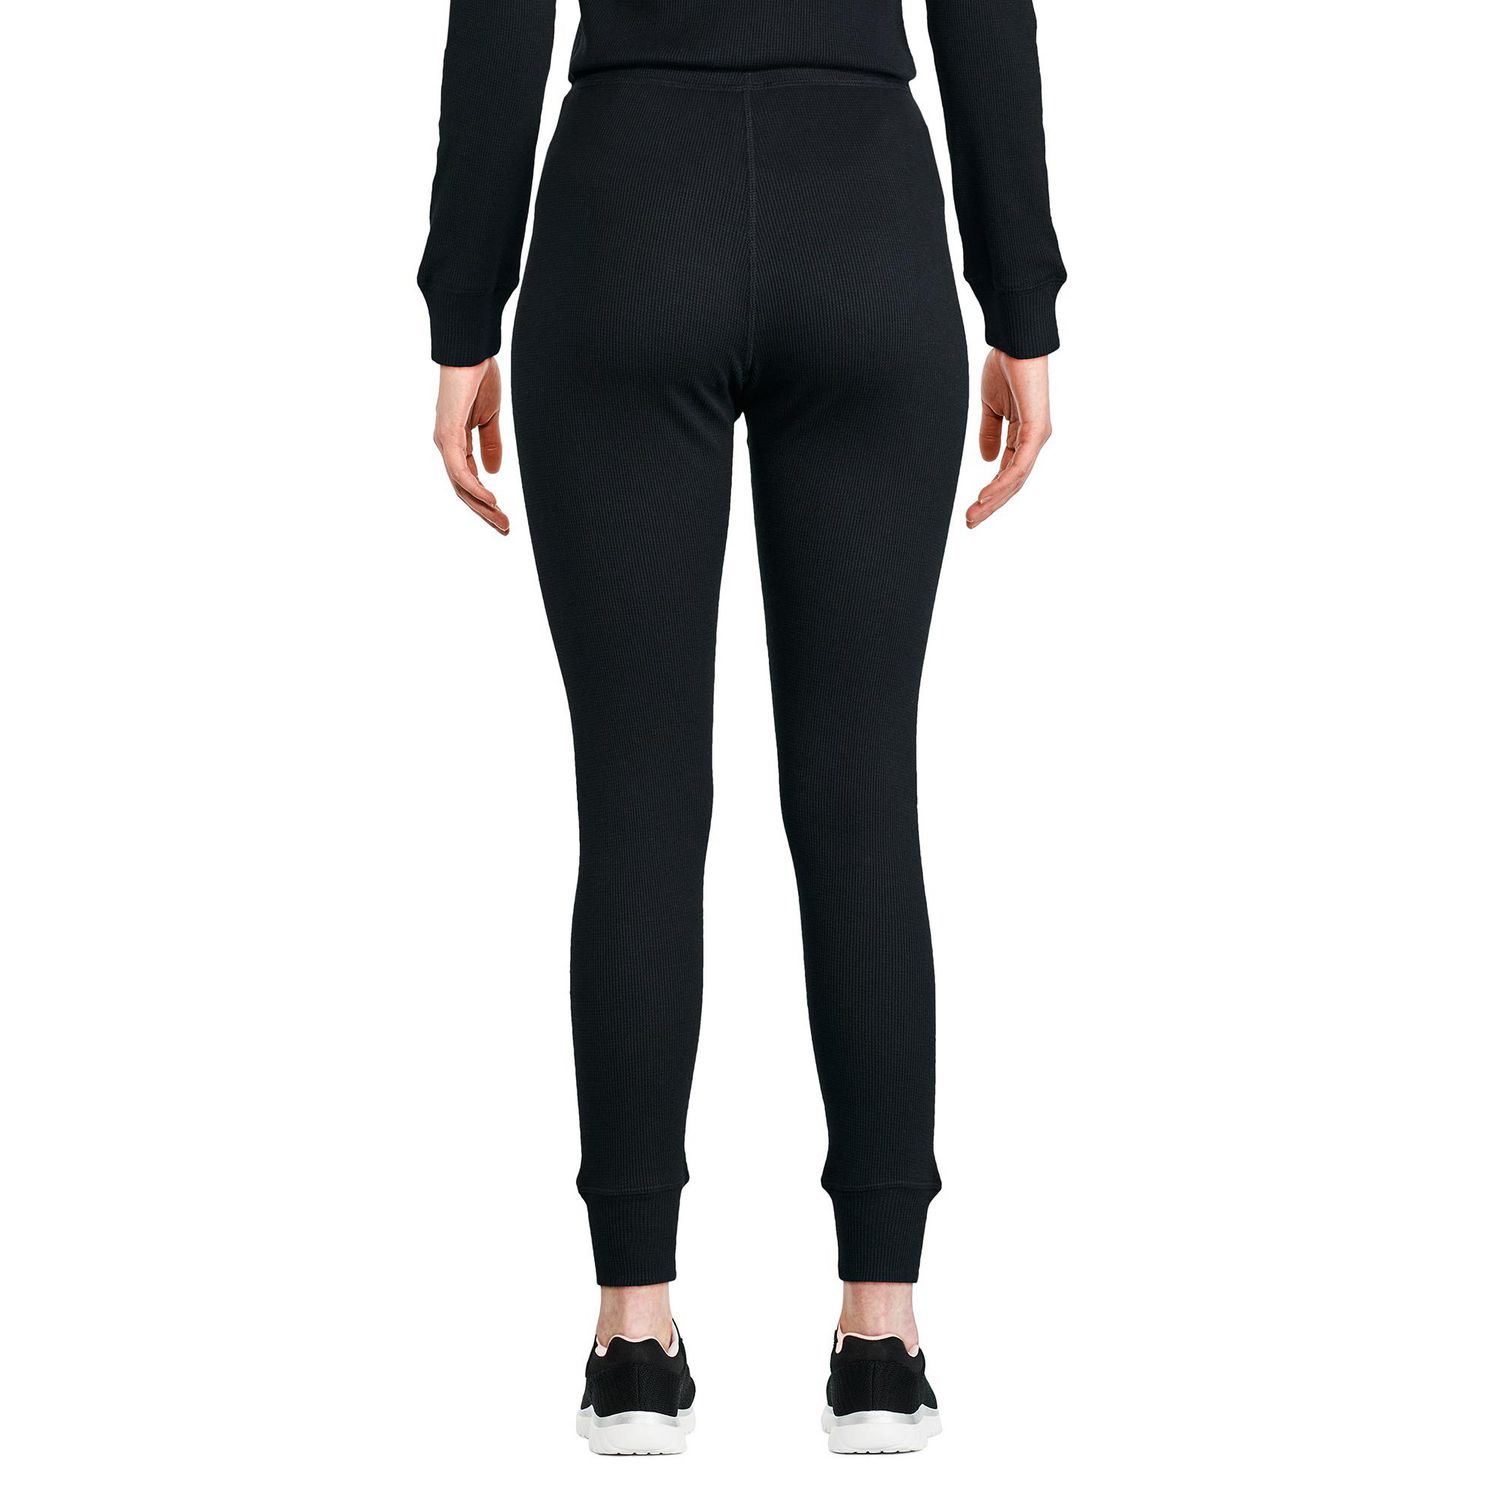 Athletic Works Women's Waffle Knit Thermal Pant 